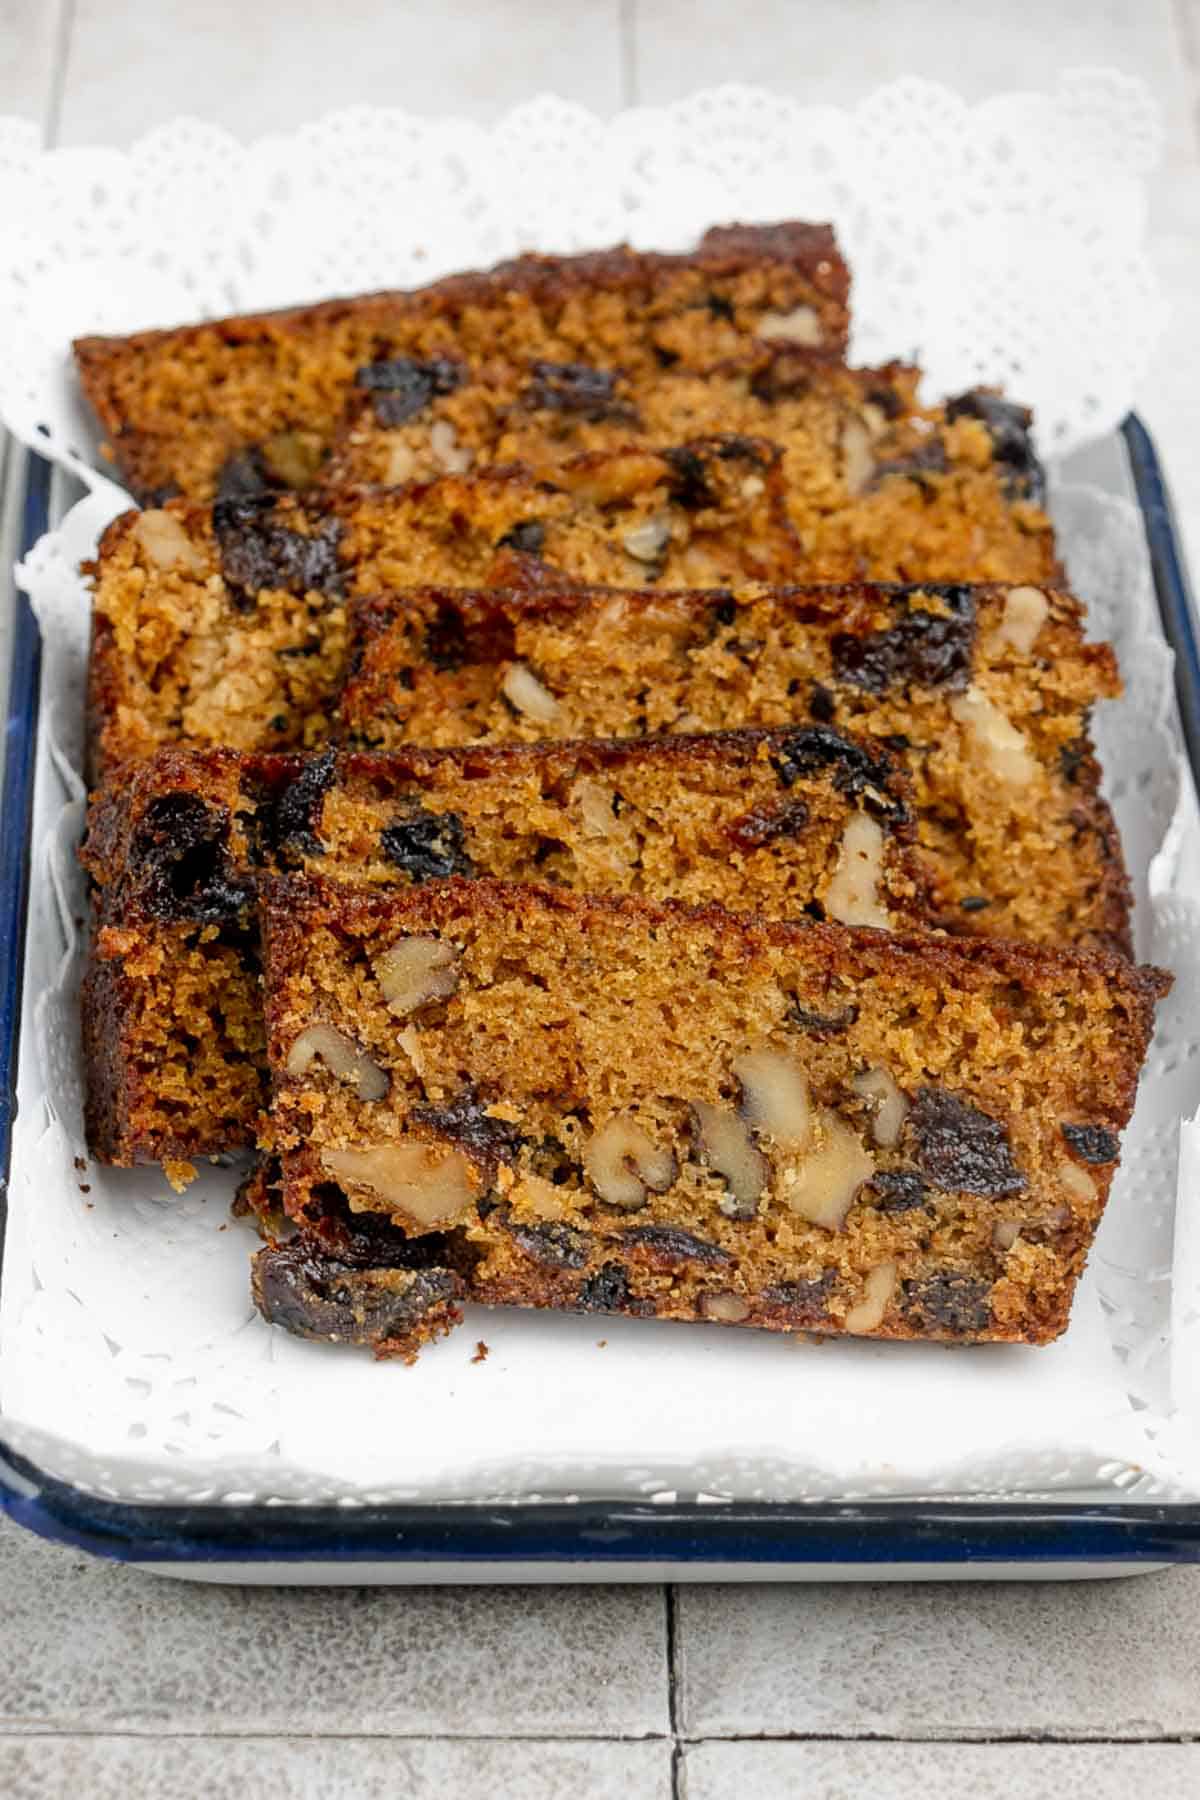 Homemade prune bread with walnuts on a serving tray.